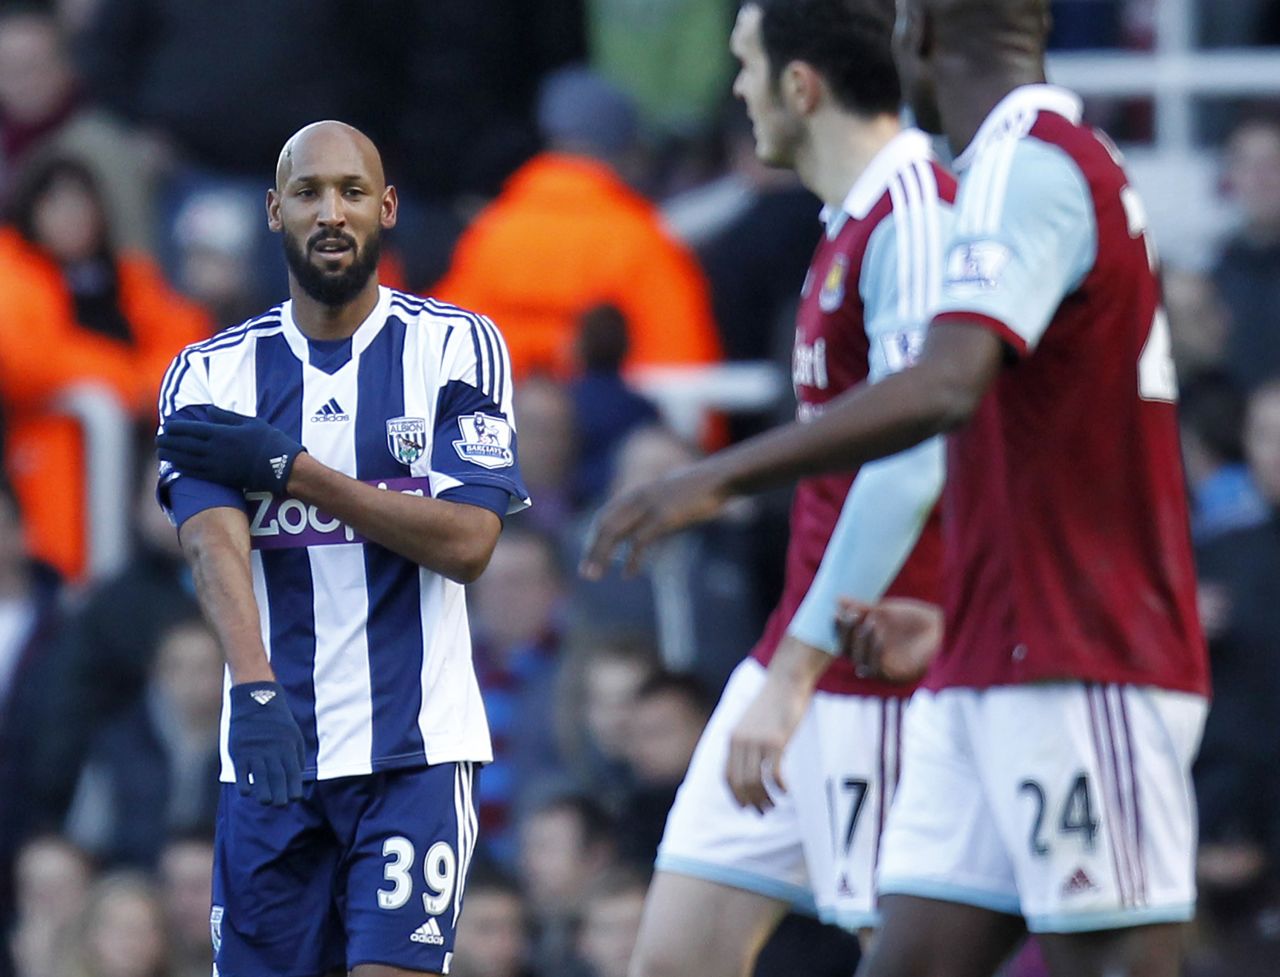 Former France striker Nicolas Anelka was handed a five-match ban by the English FA for making a "quenelle" gesture after scoring for West Brom against West Ham in December 2013. The gesture is believed by some to be a Nazi salute in reverse and has been linked with anti-Semitism in Anelka's homeland.